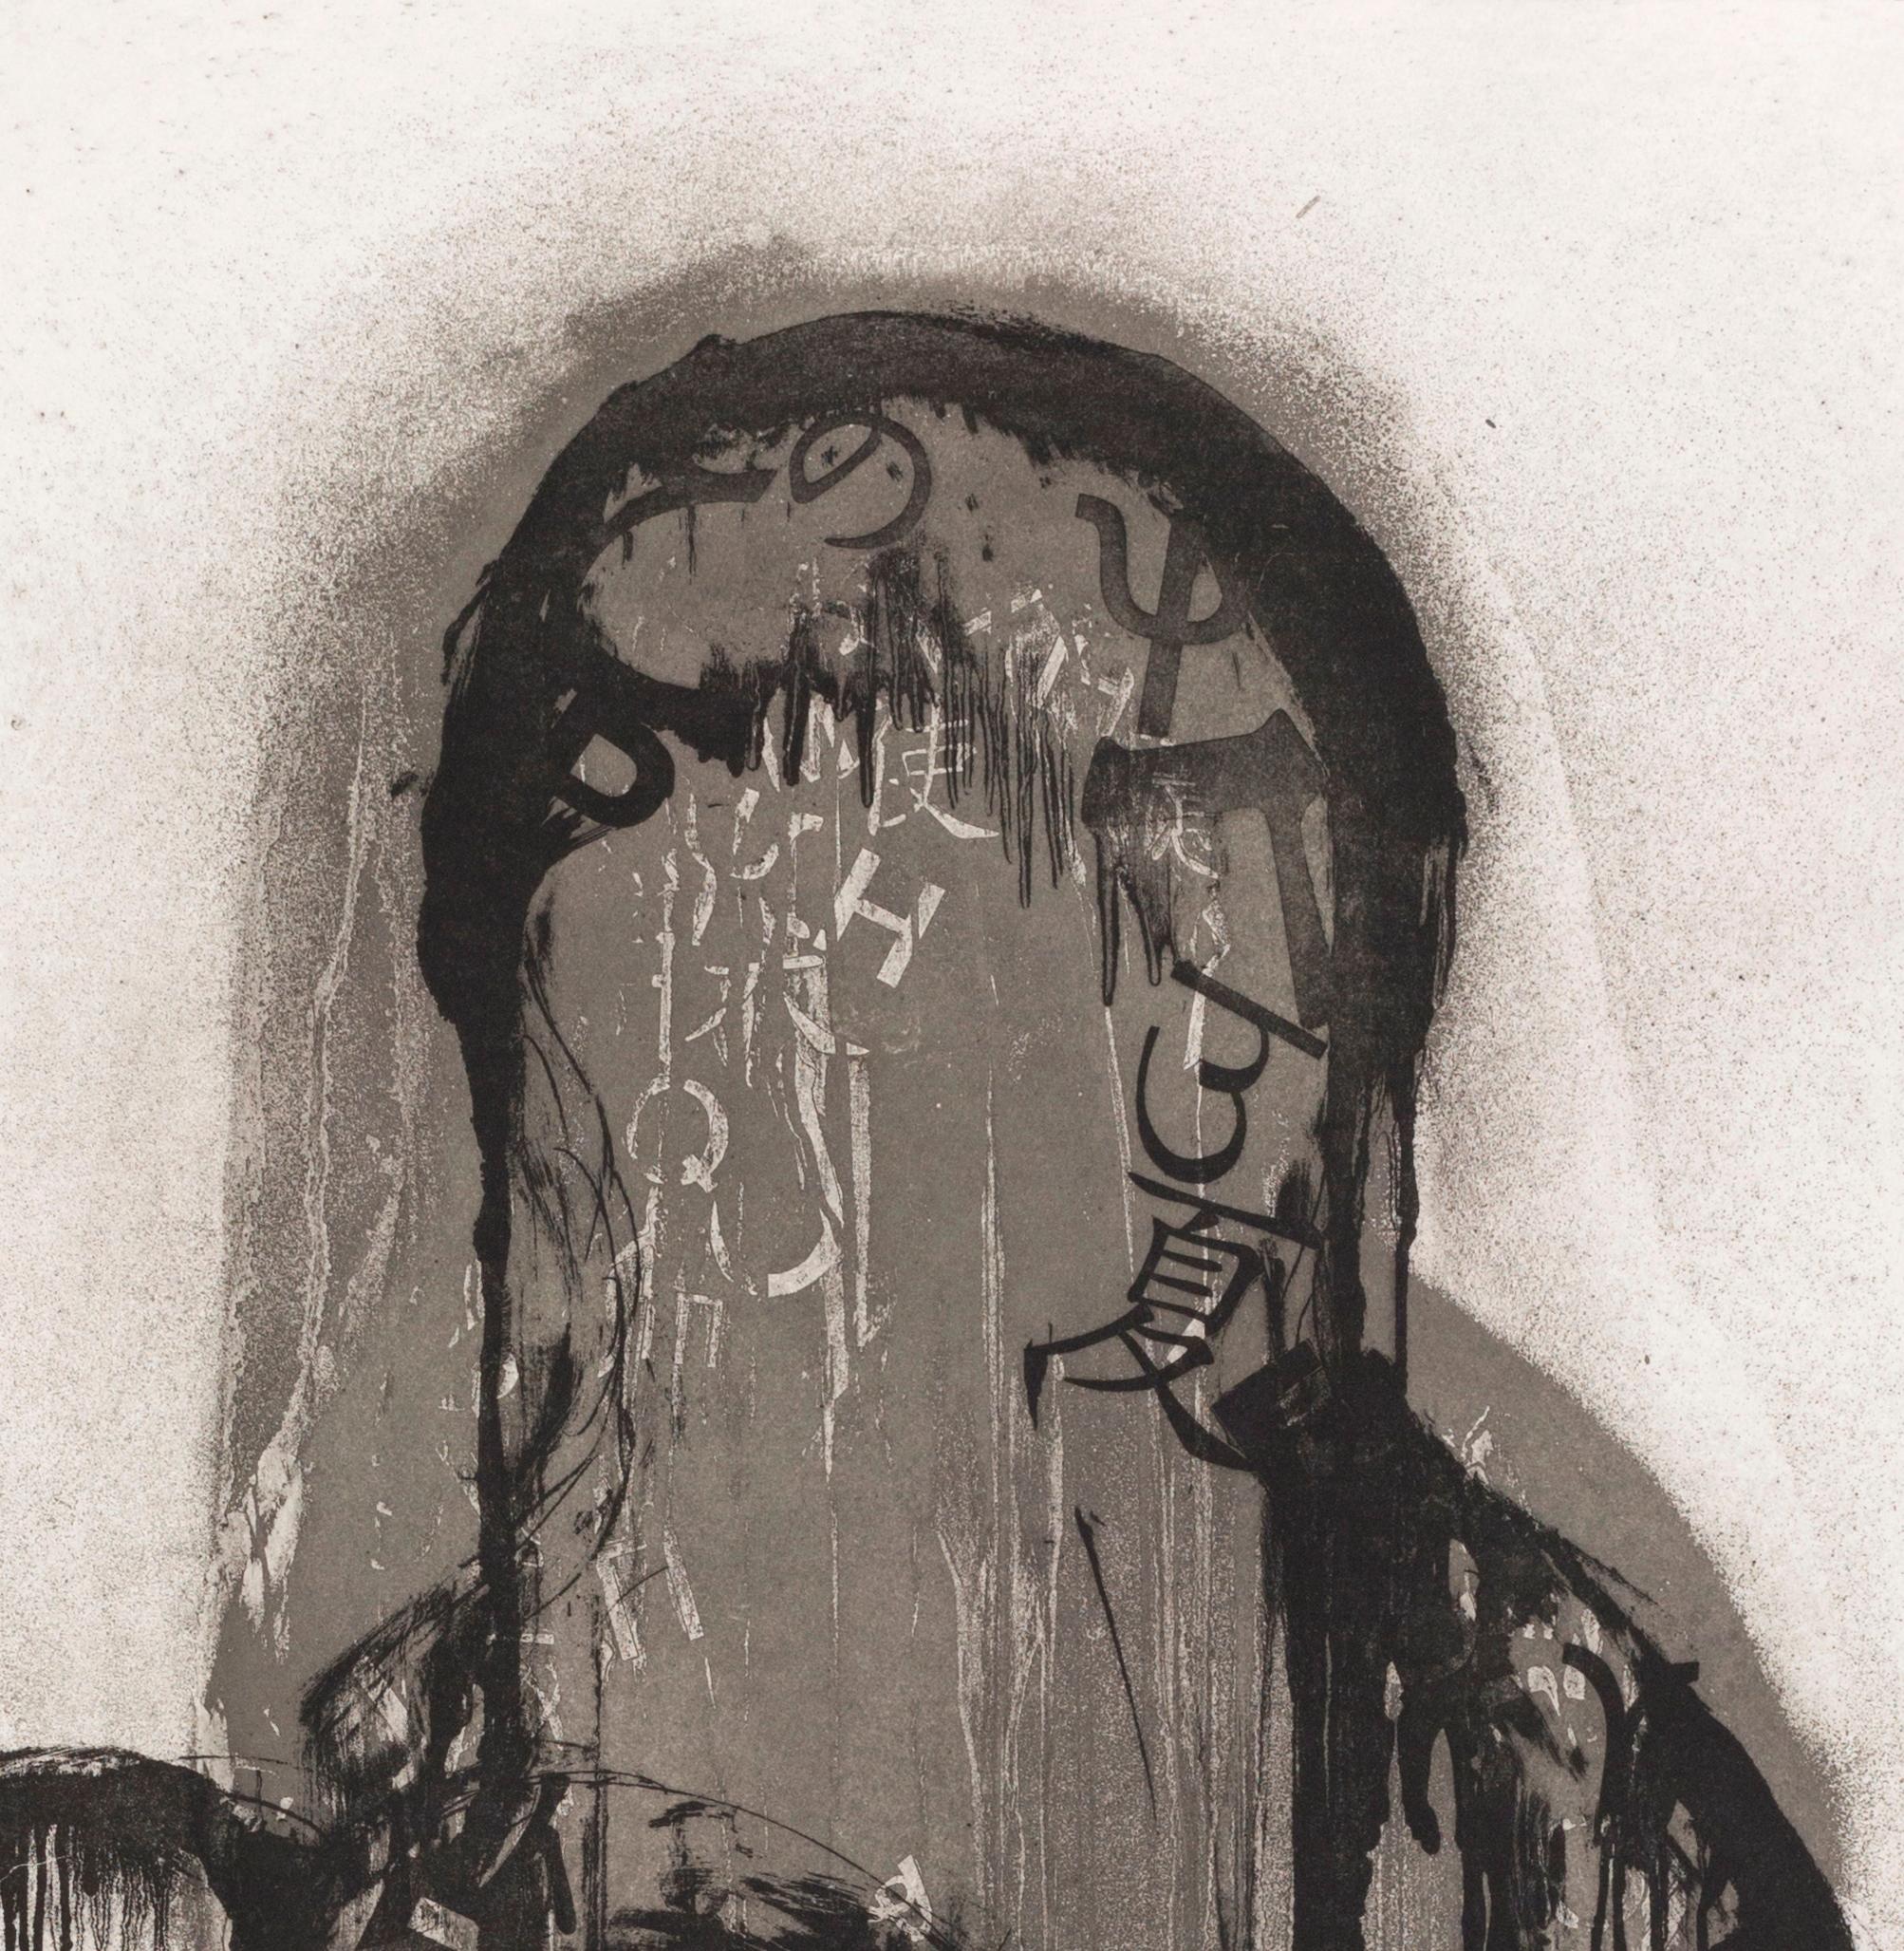 Untitled 1 Etching original painting
number 12 of an edition of 15 engravings.
Jaume Plensa Suñé (Barcelona, 1955) is a Spanish plastic artist, sculptor and engraver. Very versatile artist who has also experimented with drawing, opera sets, video